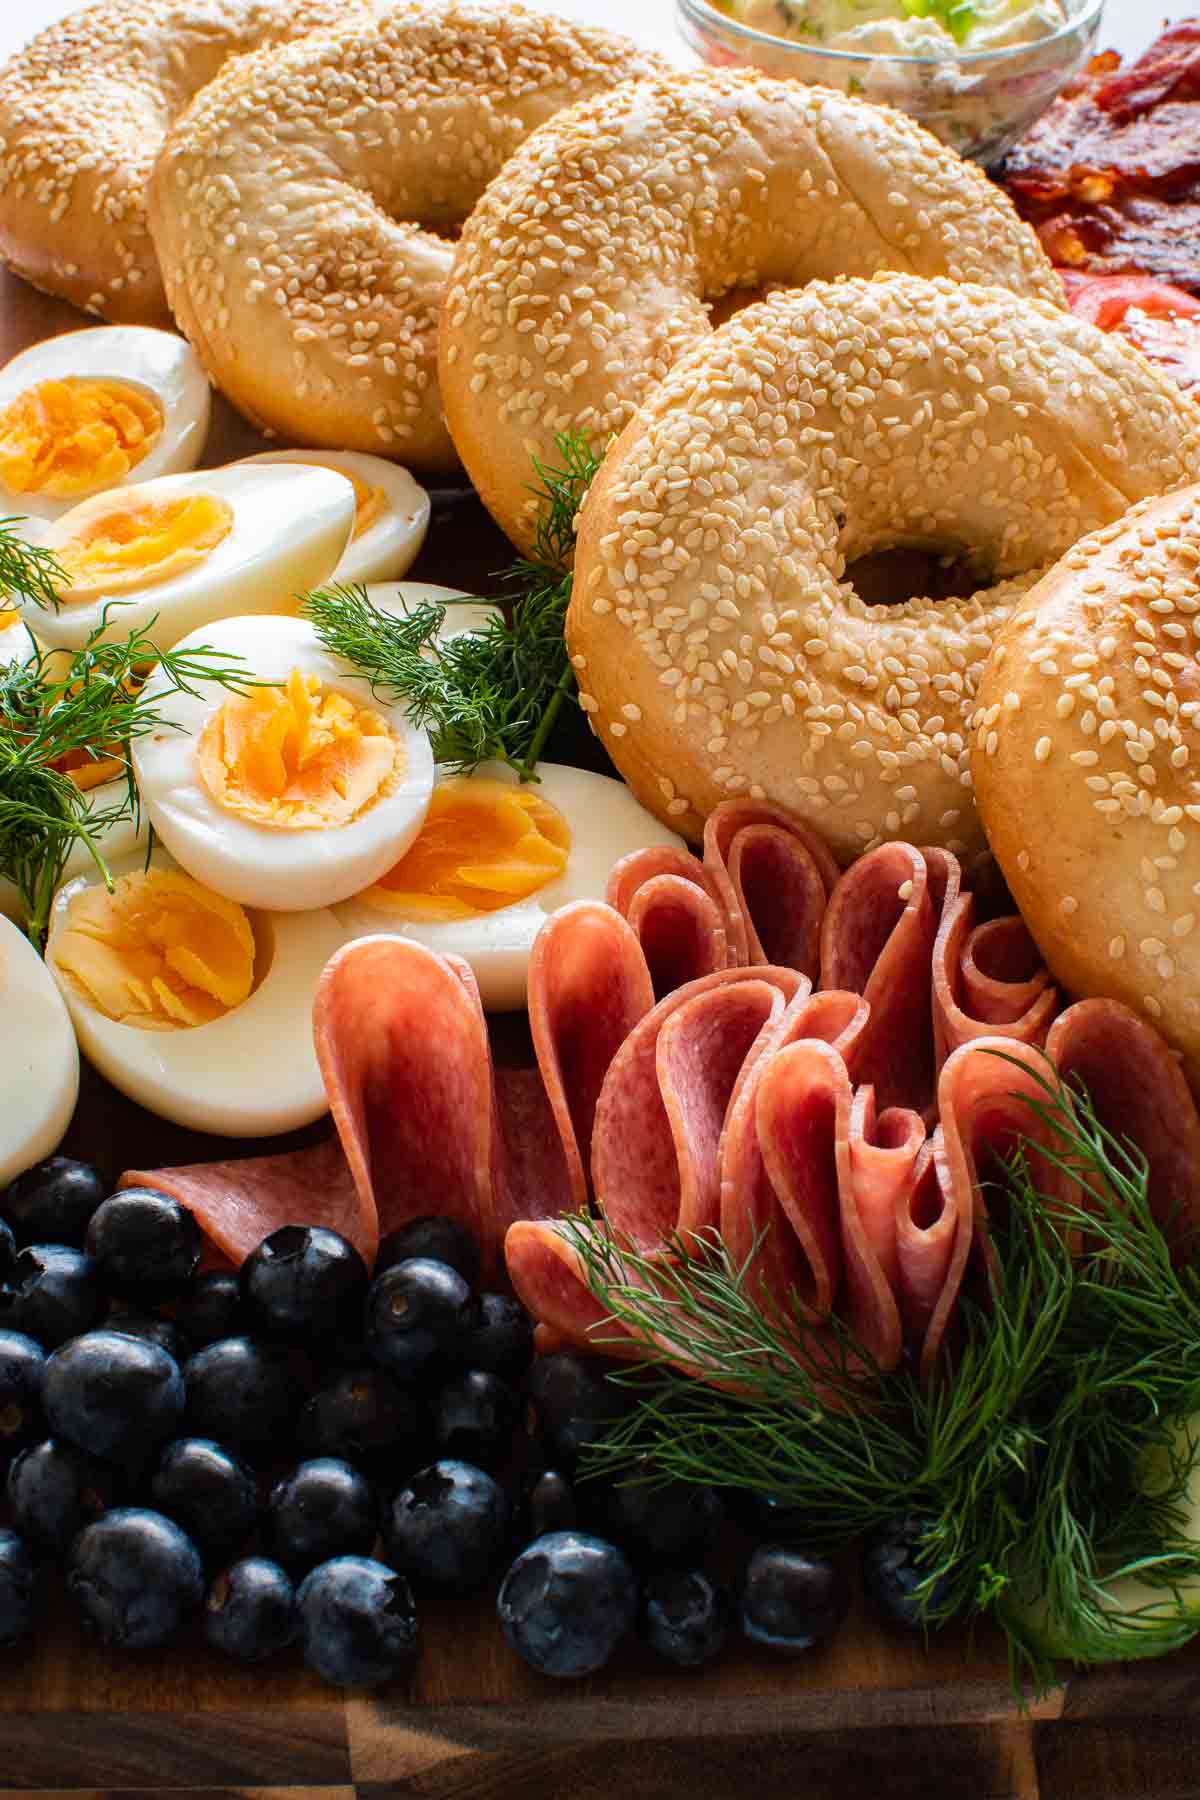 Bagels on a grazing platter with boiled eggs, salami, dill and blueberries.